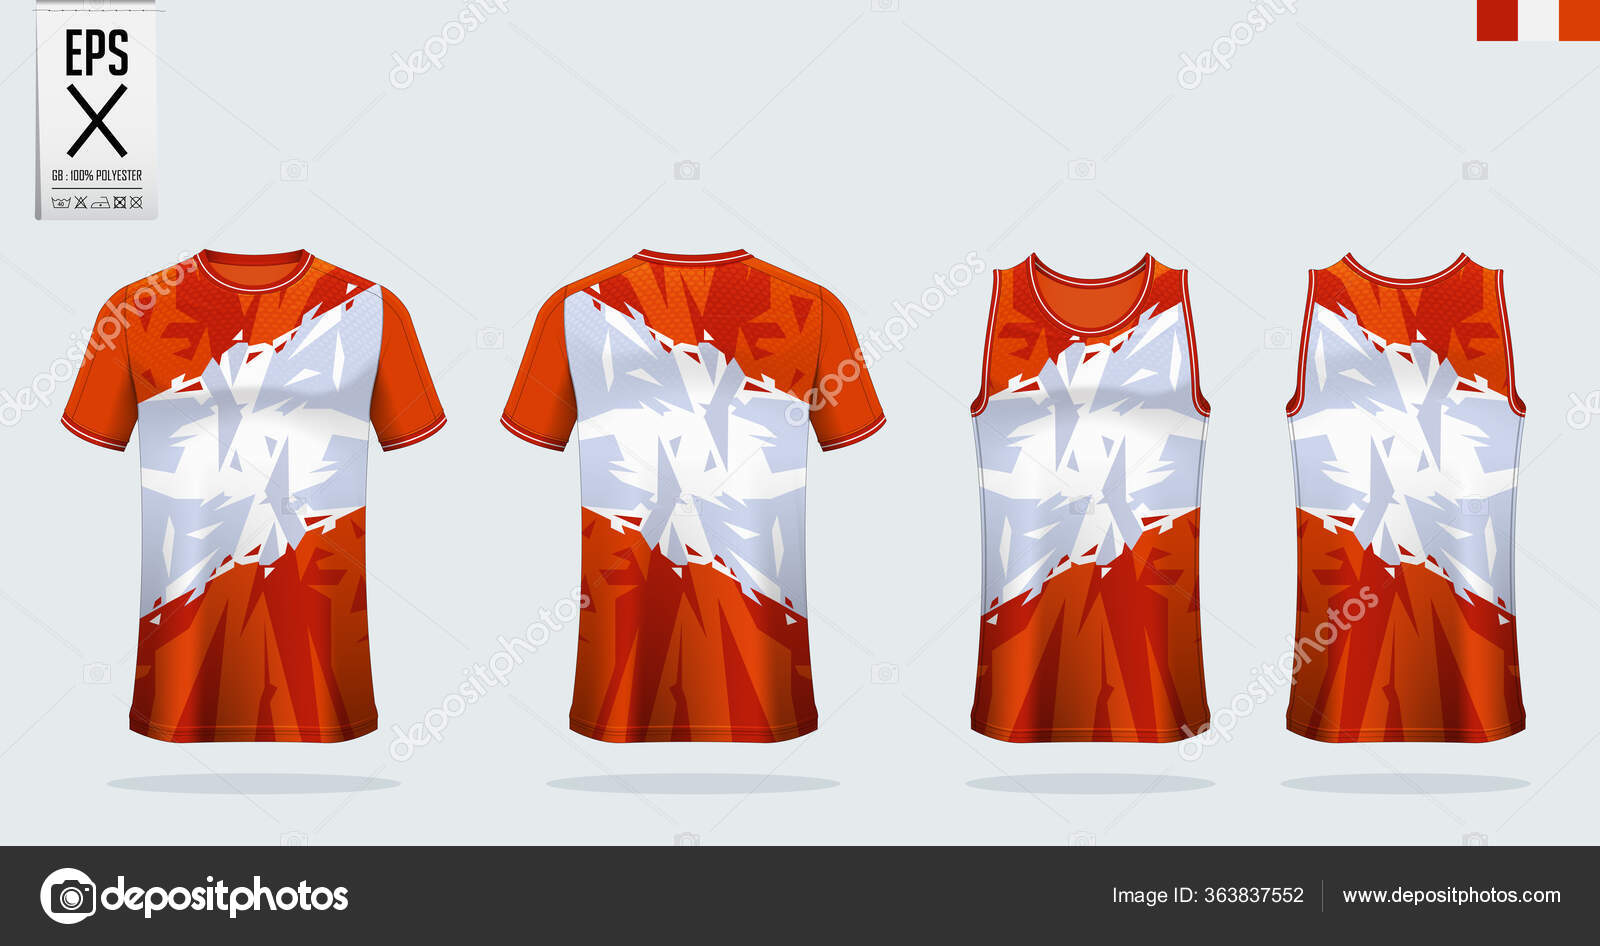 Download Shirt Mockup Sport Shirt Template Design Soccer Jersey Football Kit Vector Image By C Tond Ruangwit Gmail Com Vector Stock 363837552